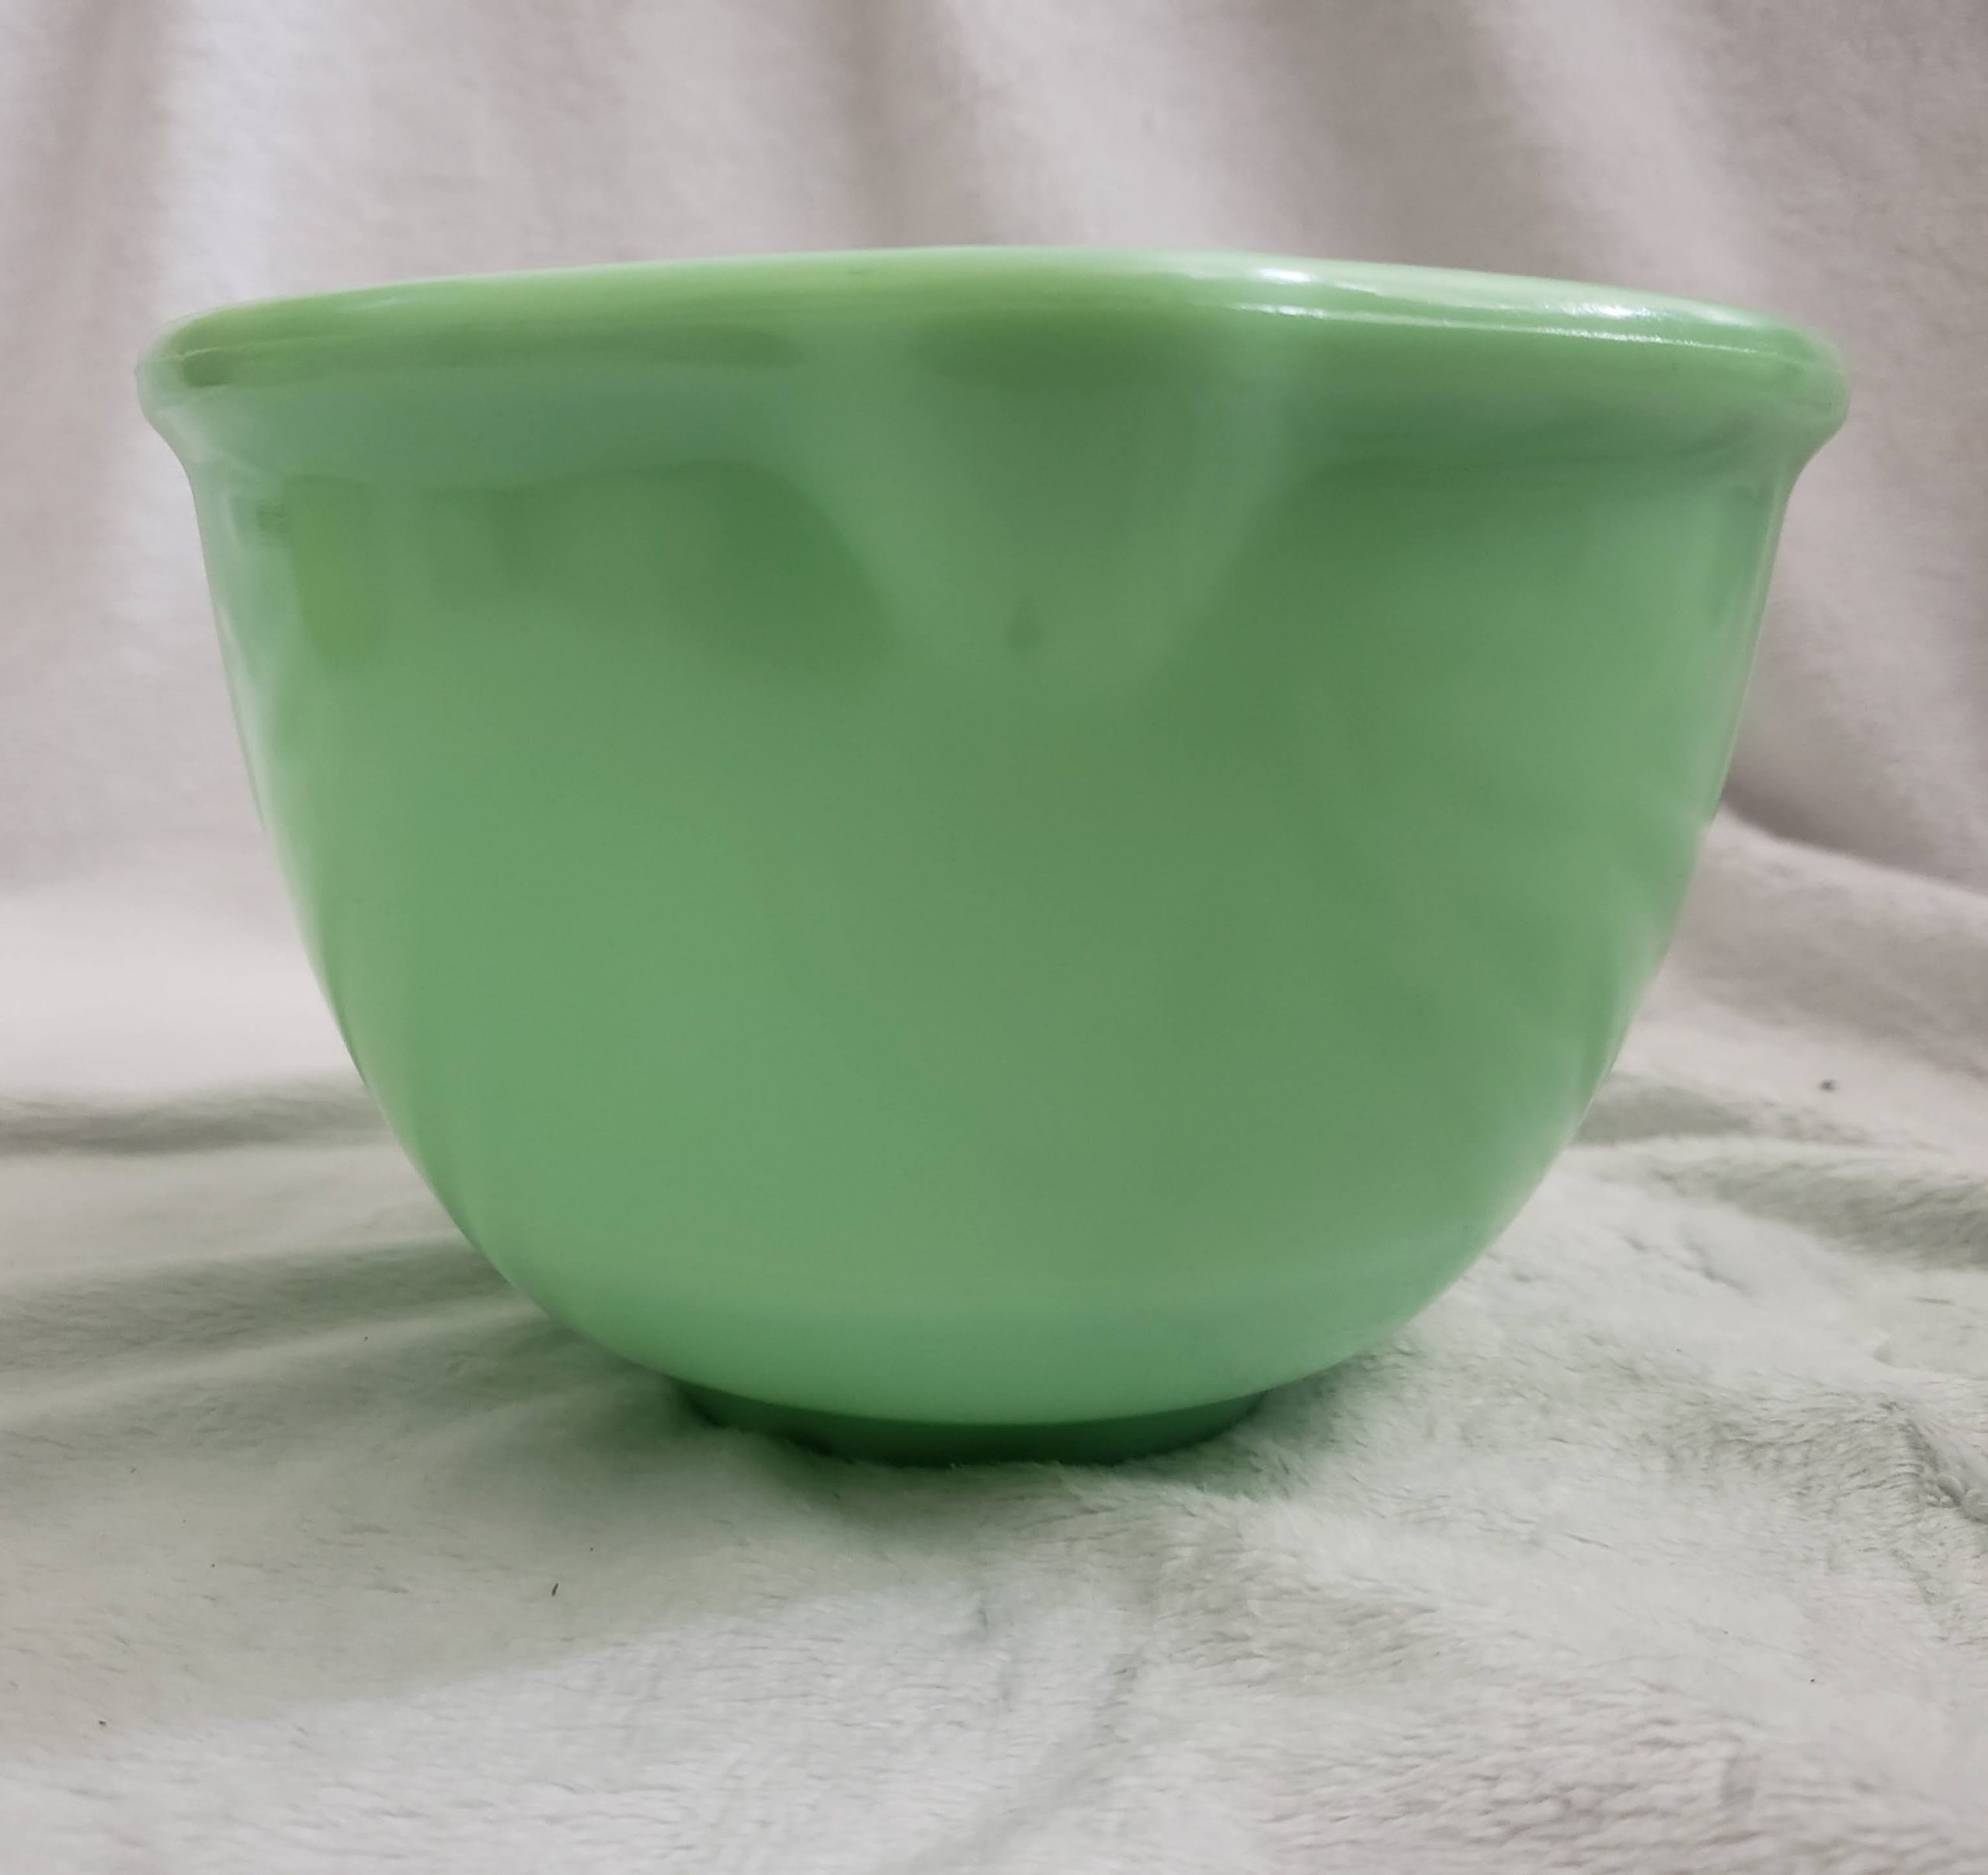 https://serstyle.com/wp-content/uploads/2020/03/fire-king-jadeite-mixing-bowl--scaled.jpg